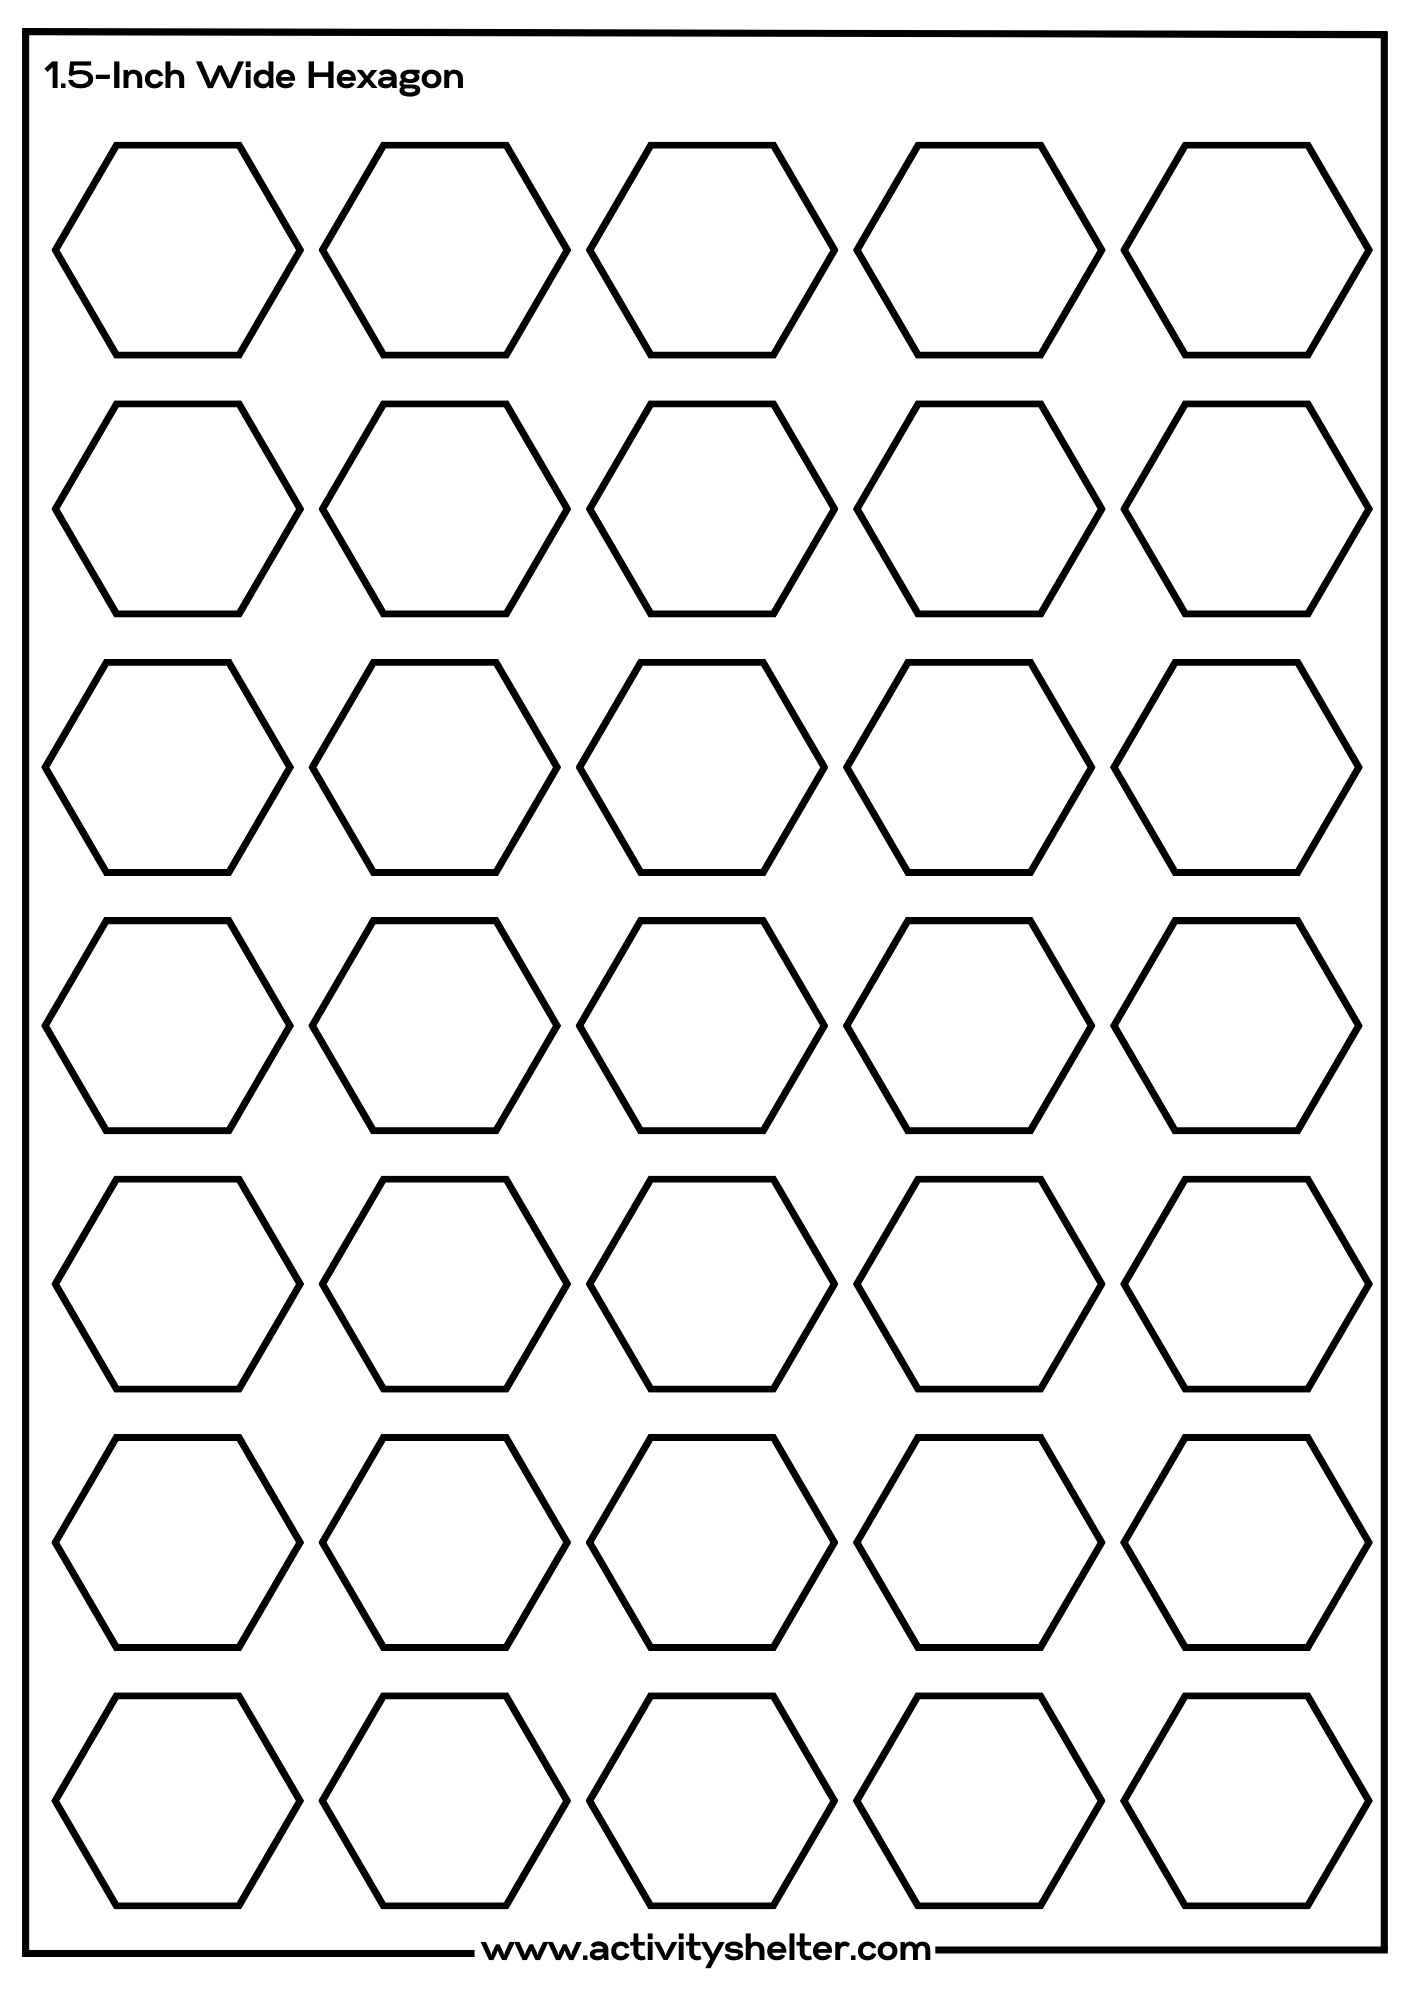 Hexagon Templates to Print 1.5-Inch Wide